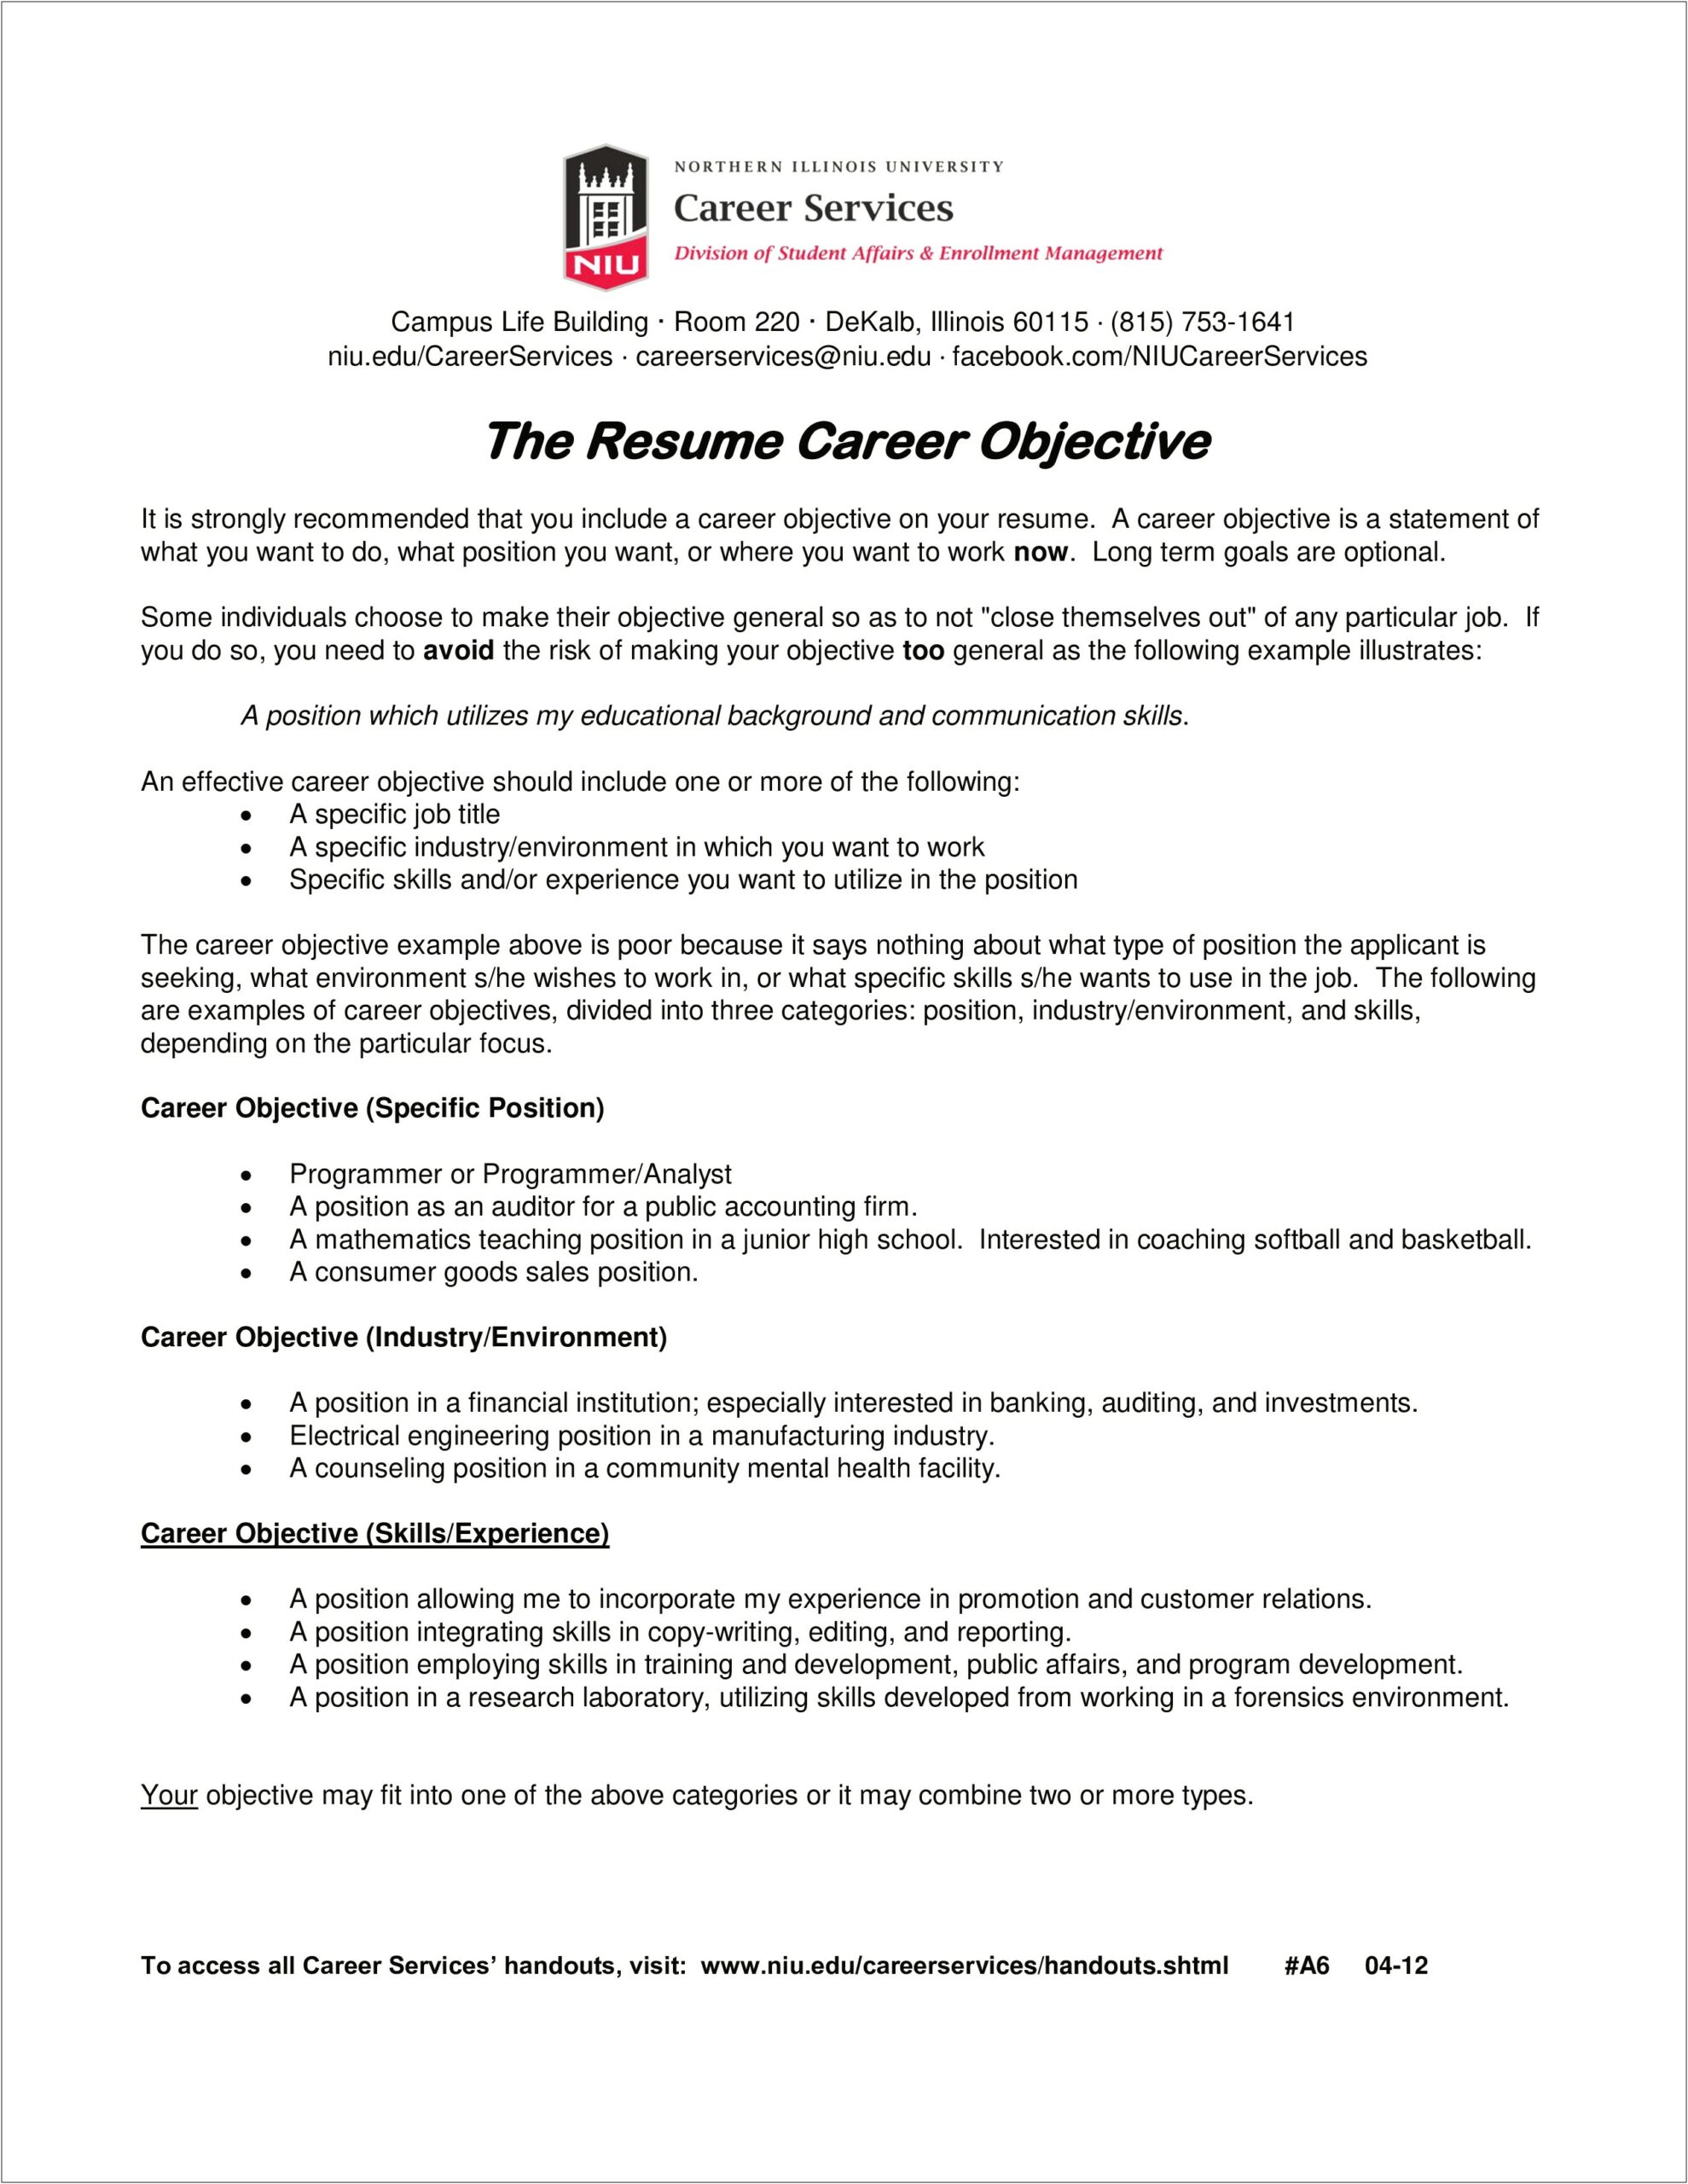 Sales Career Objectives For Resumes